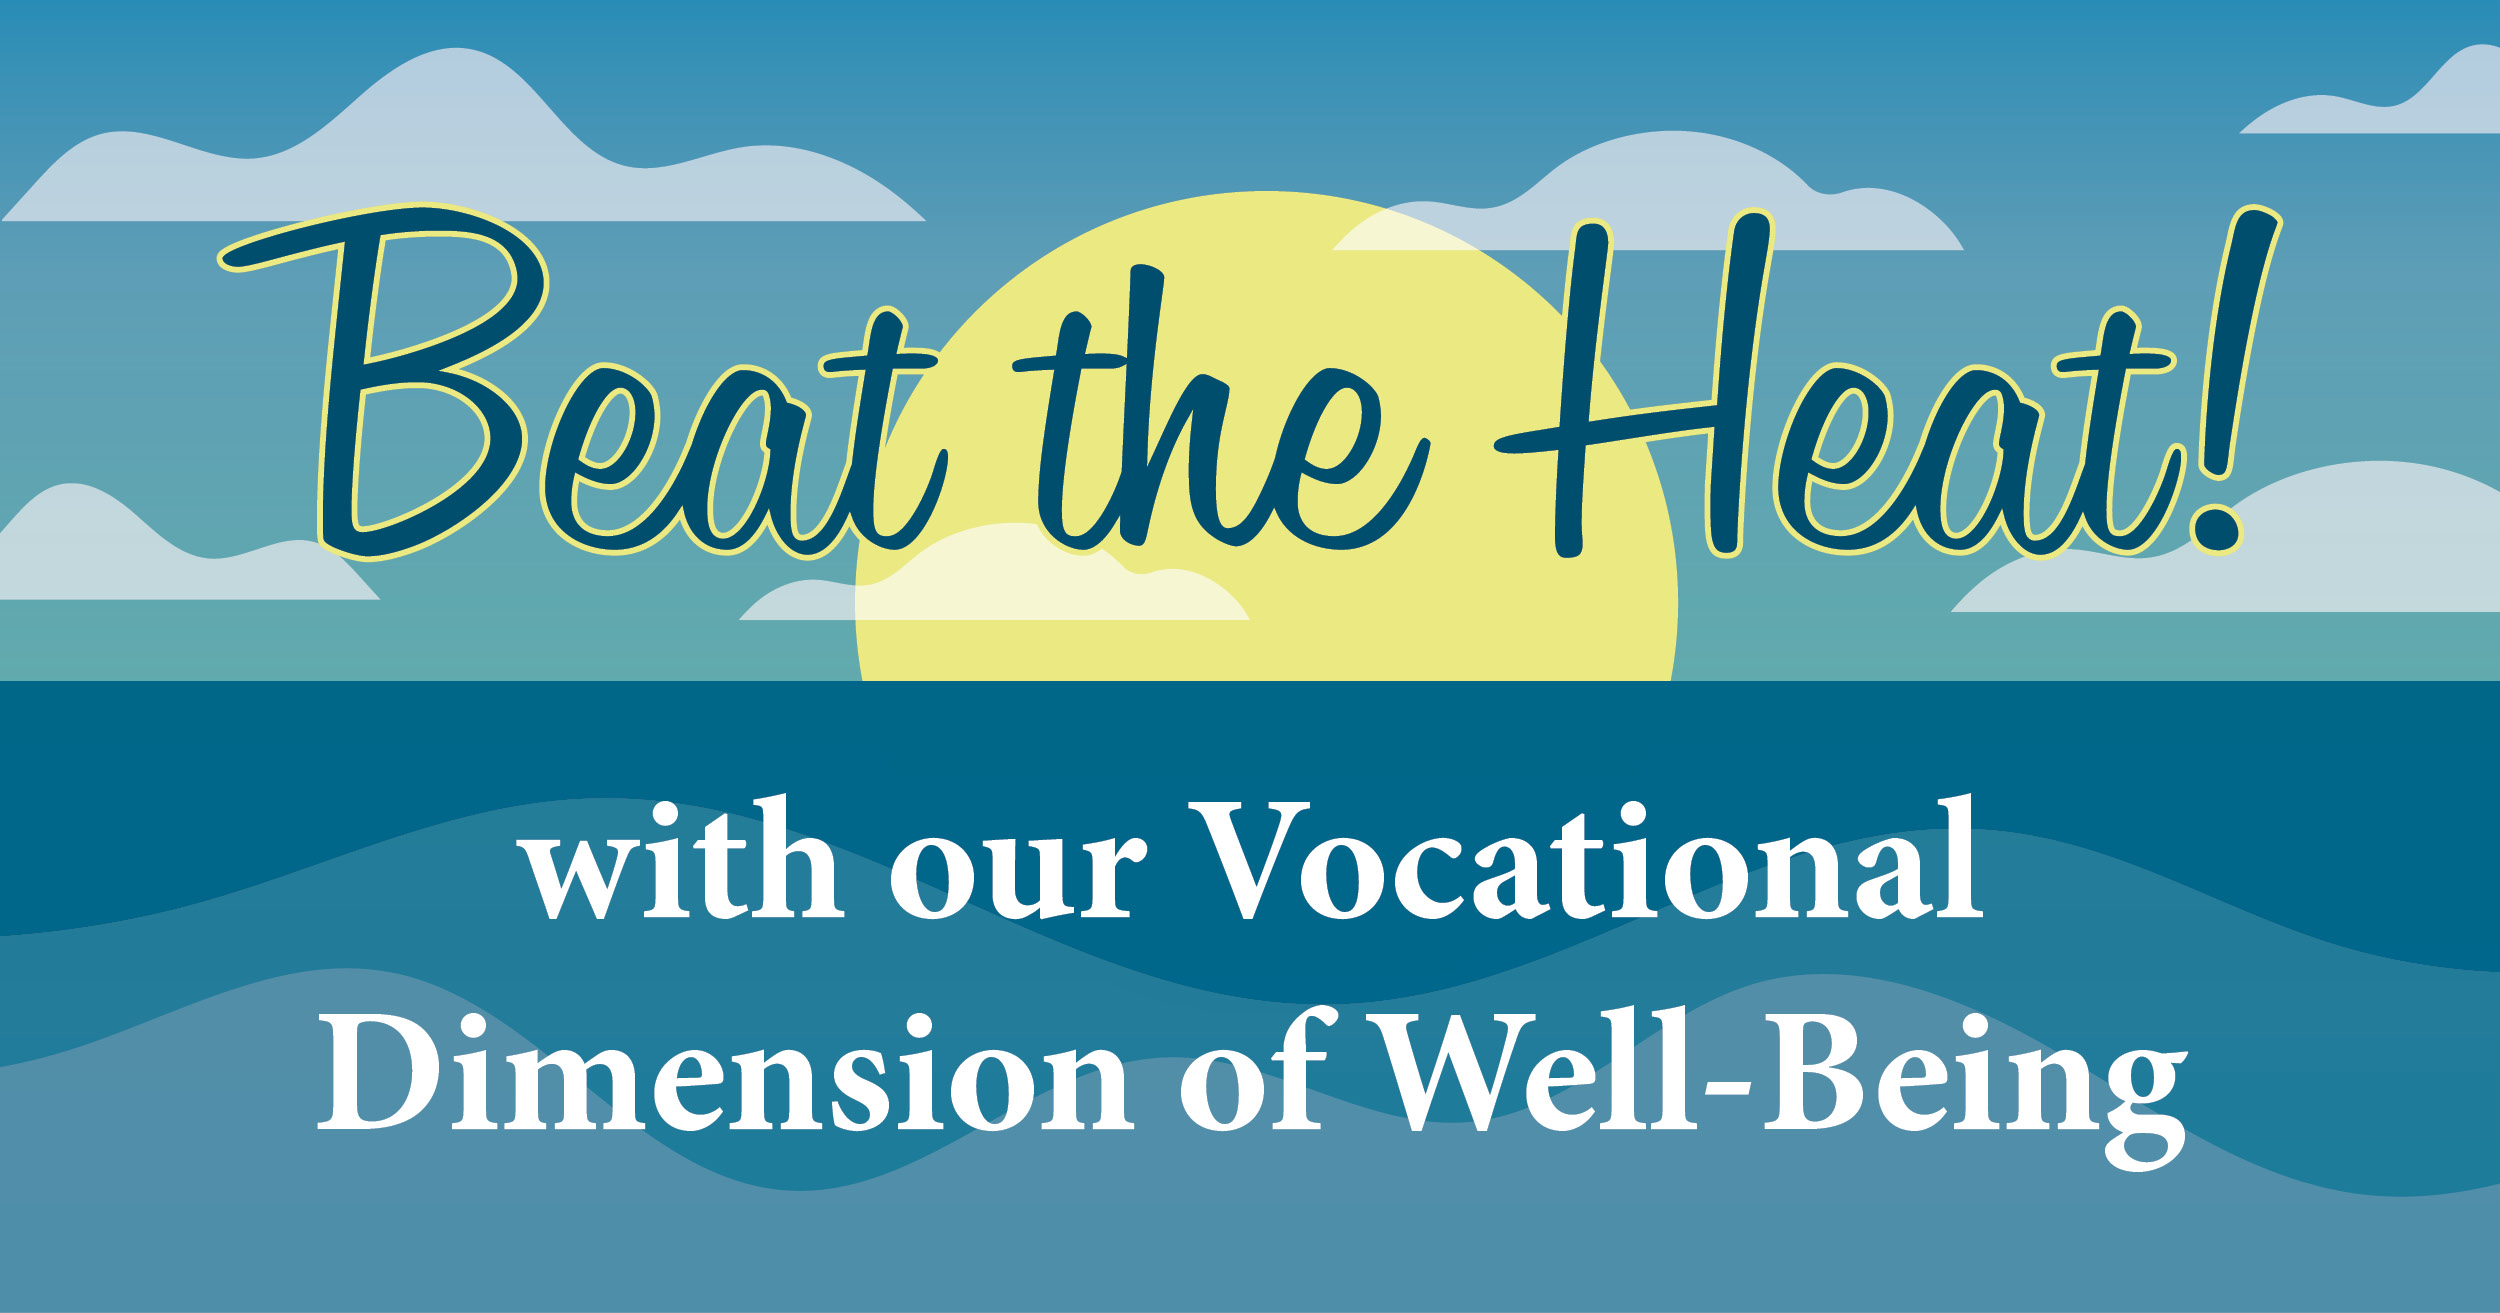 Beat the Heat This Summer with Our Vocational Dimension of Well-Being